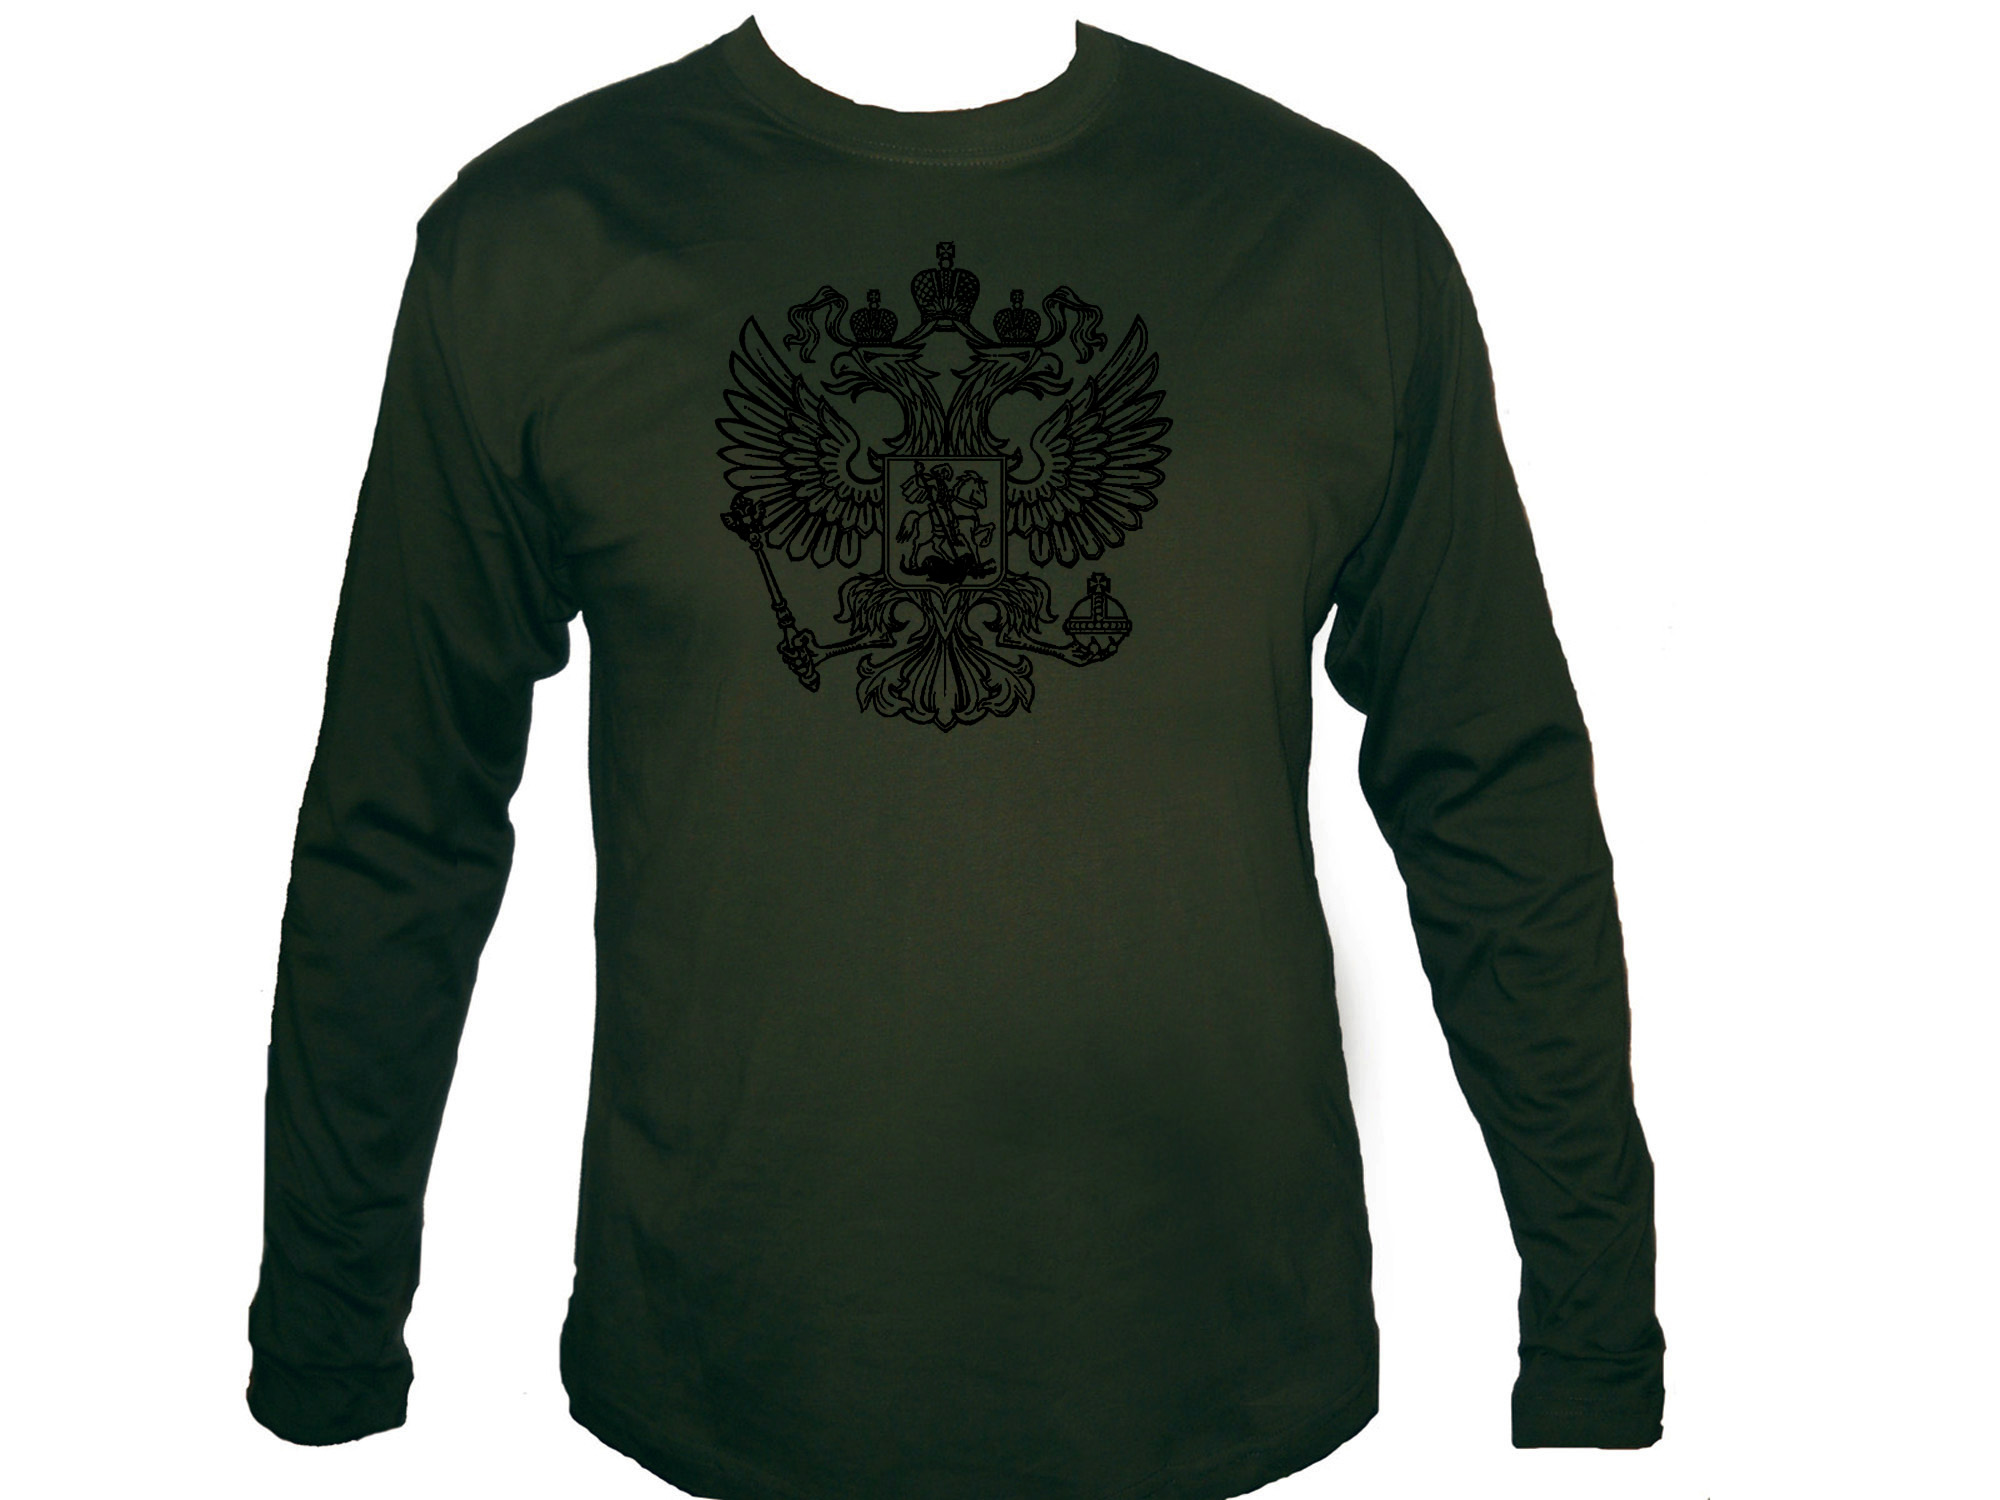 Russian coat of arms two headed eagle sleeved olive t-shirt